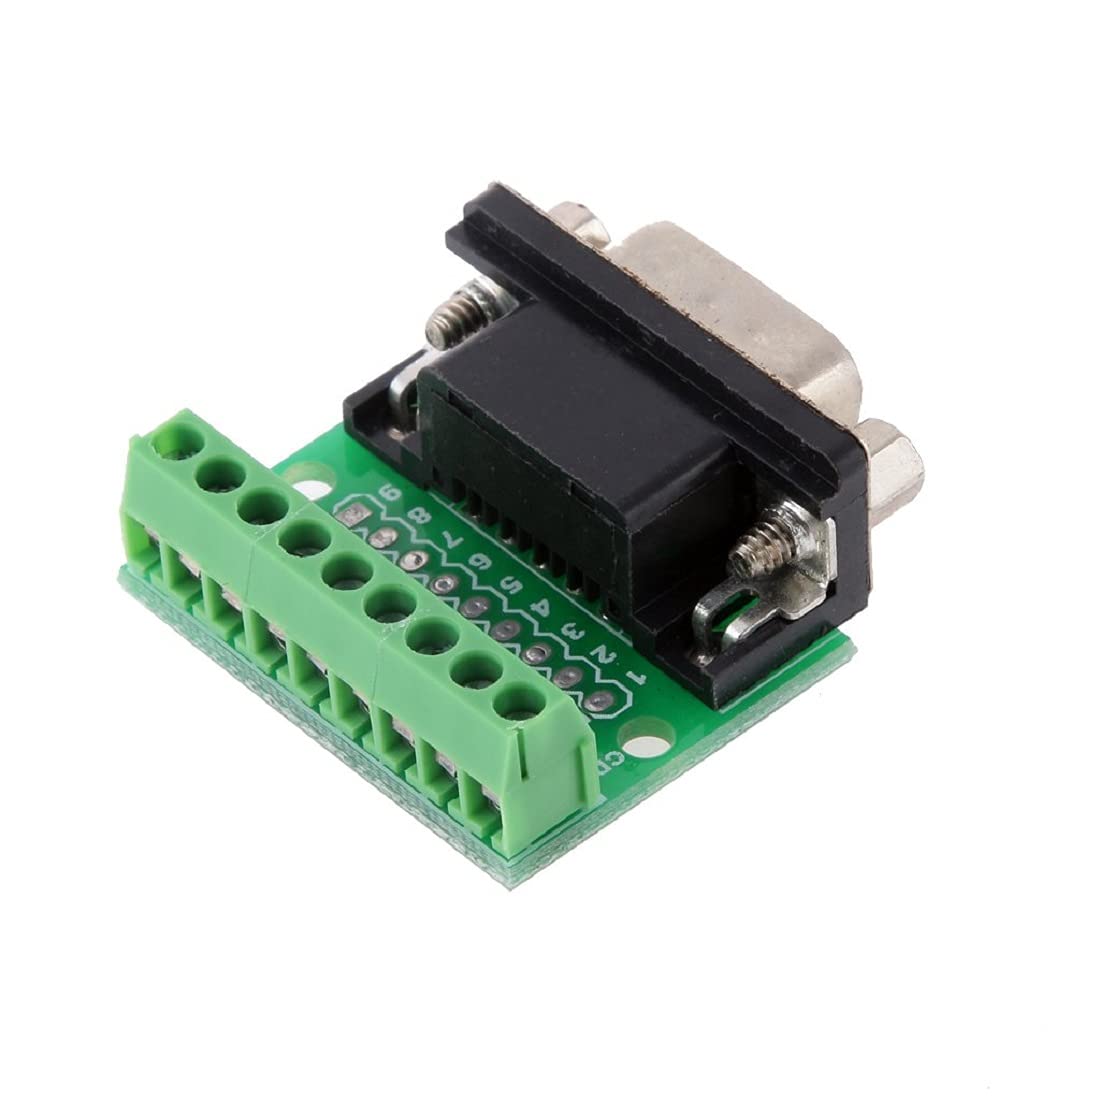 DB9 RS232 Adaptateur male a 9 Position Terminal